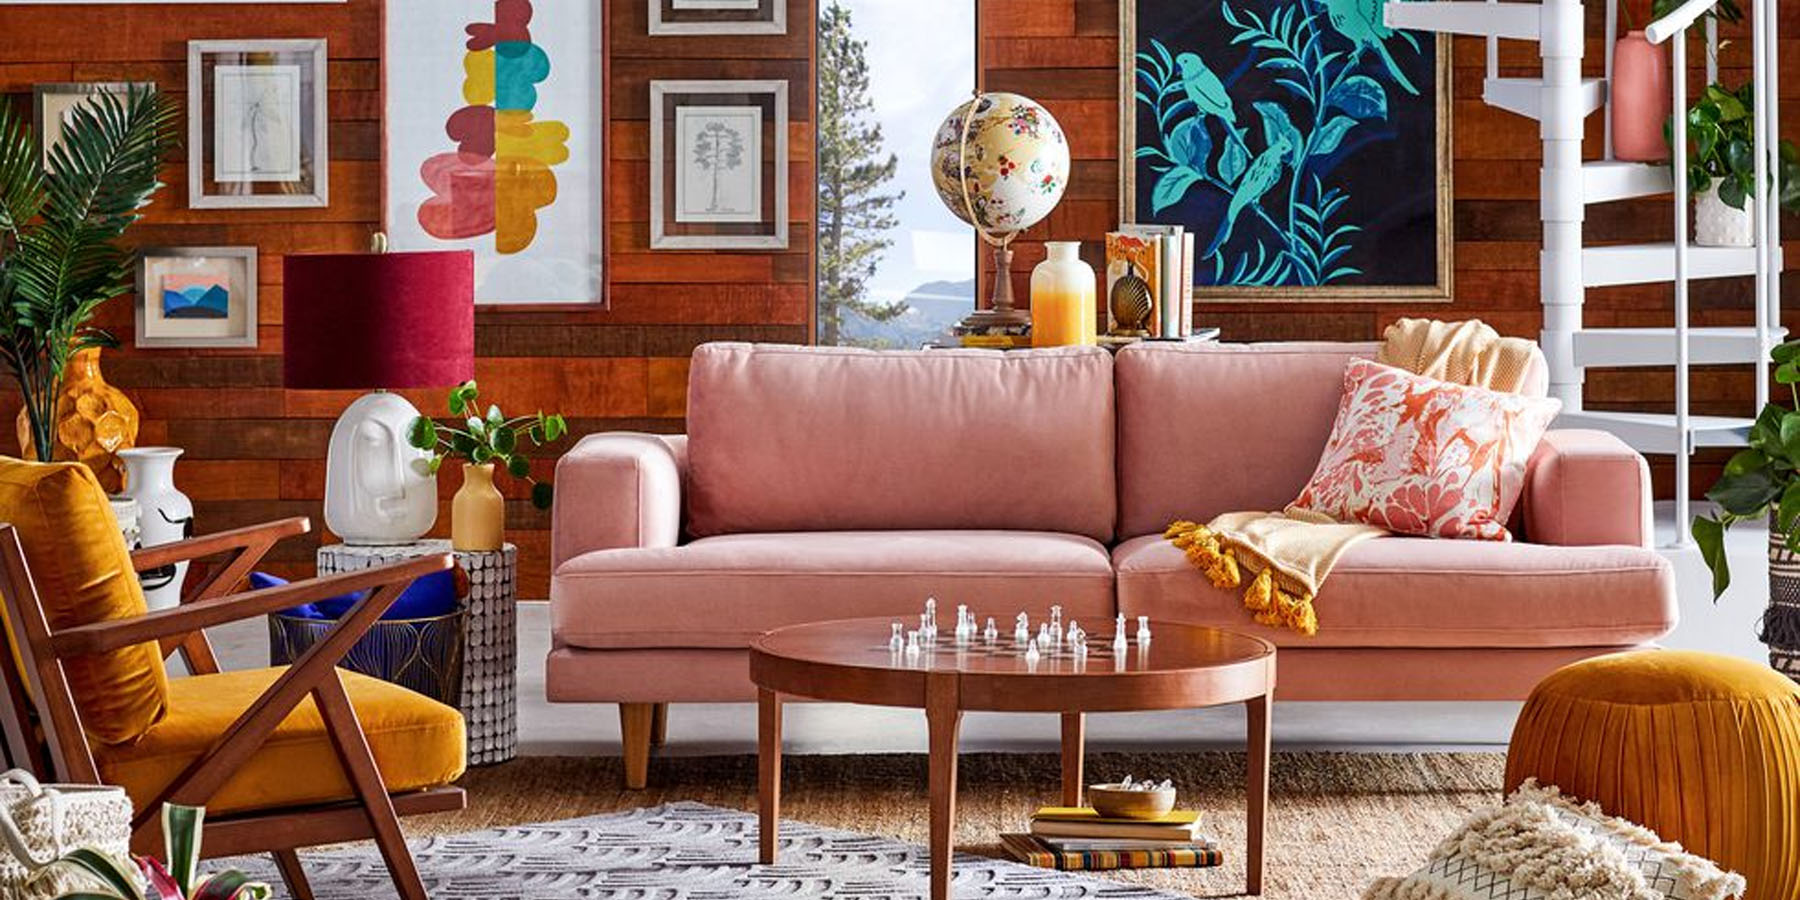 Drew Barrymore's New Furniture Collection Is 'Beautiful